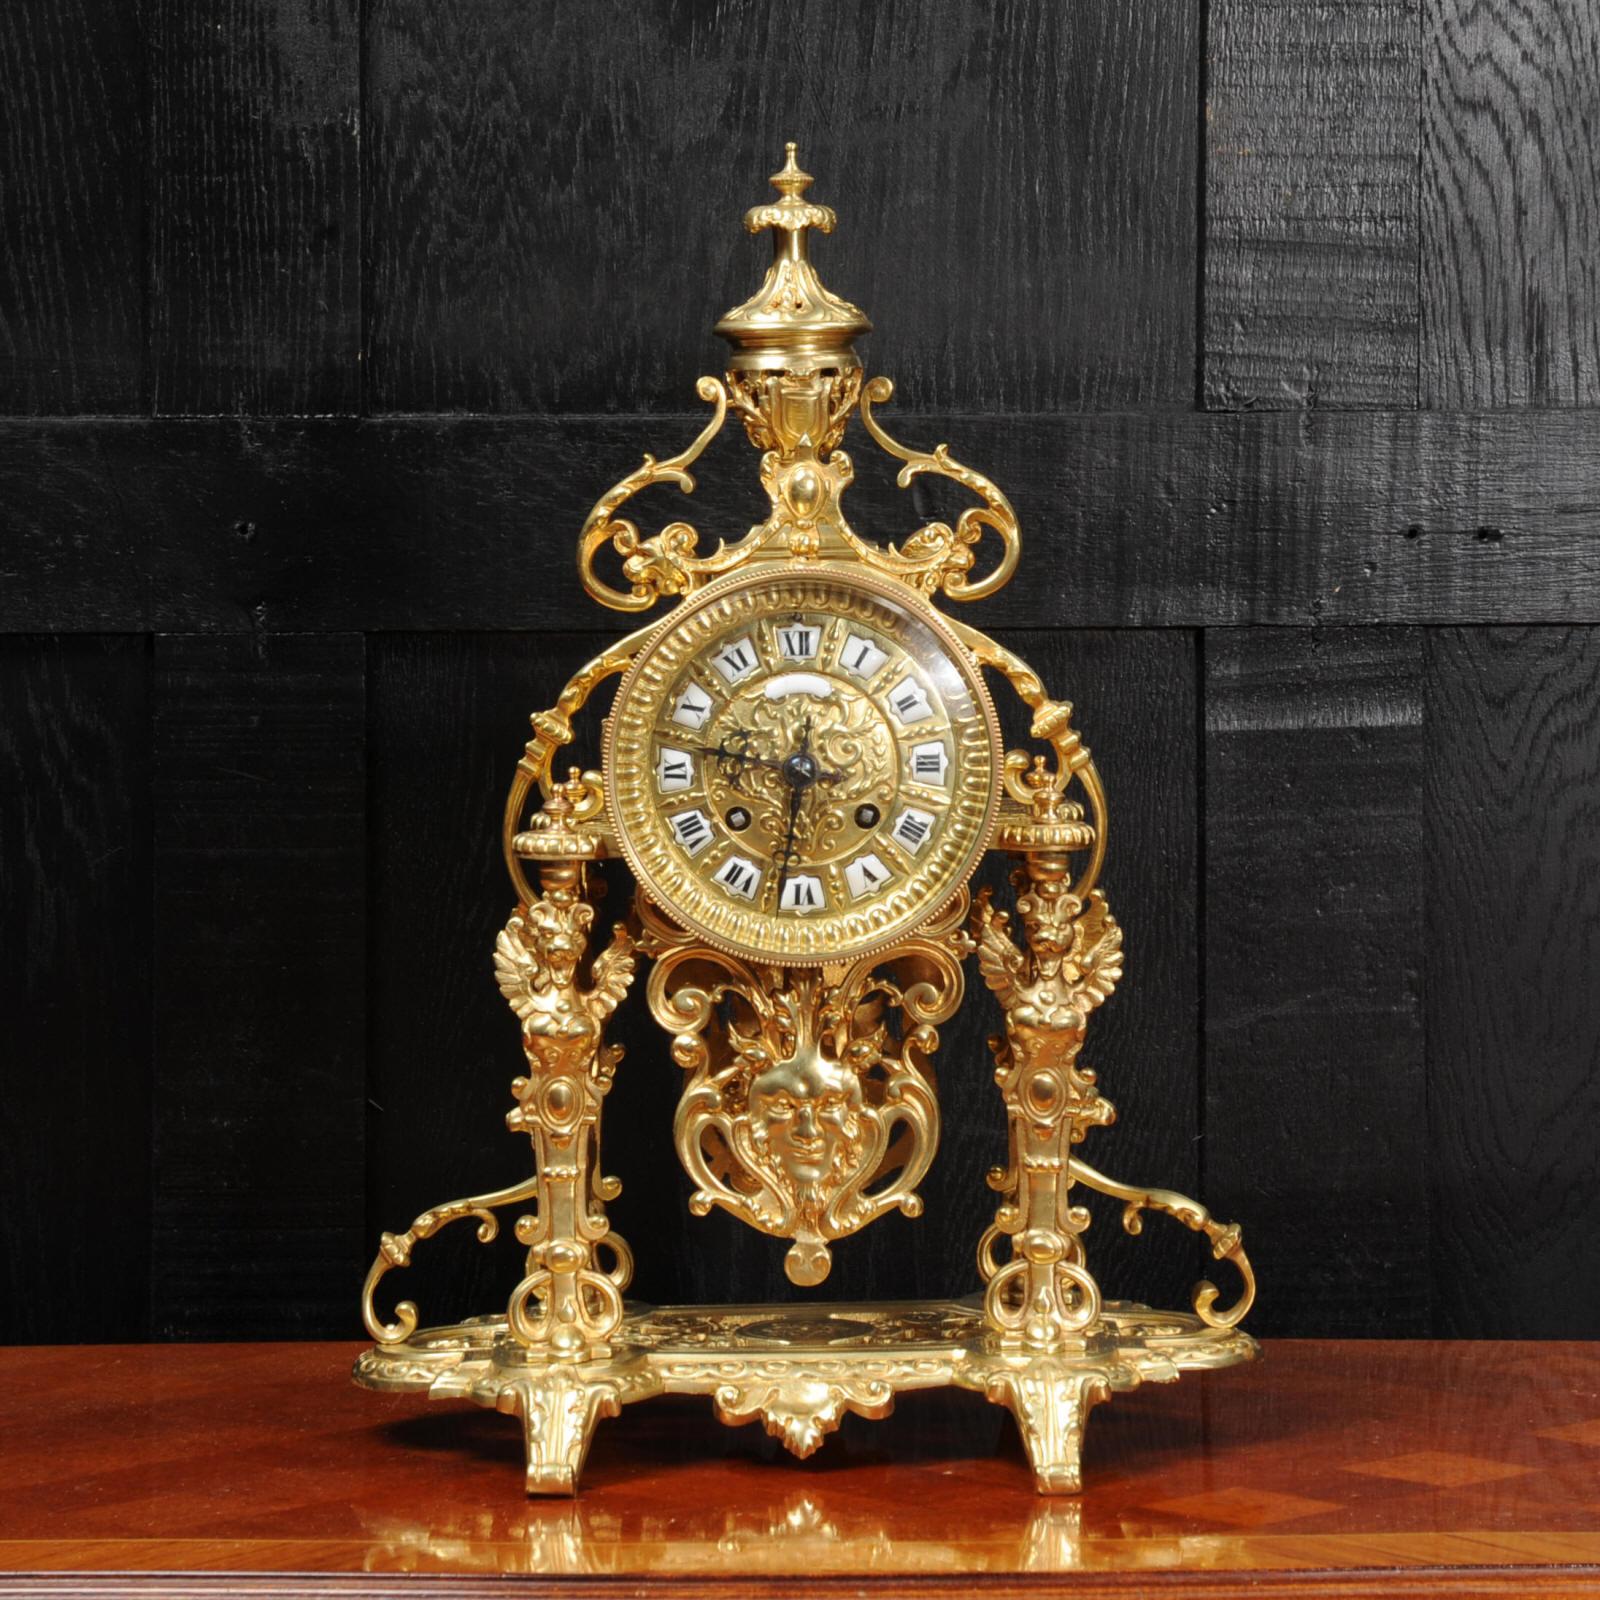 A very decorative gilt bronze portico clock by the famous maker Japy Frères, dating from circa 1890. It is Baroque in style featuring four pillars of winged mythical creatures holding the movement aloft. The gilt bronze pendulum swings visibly